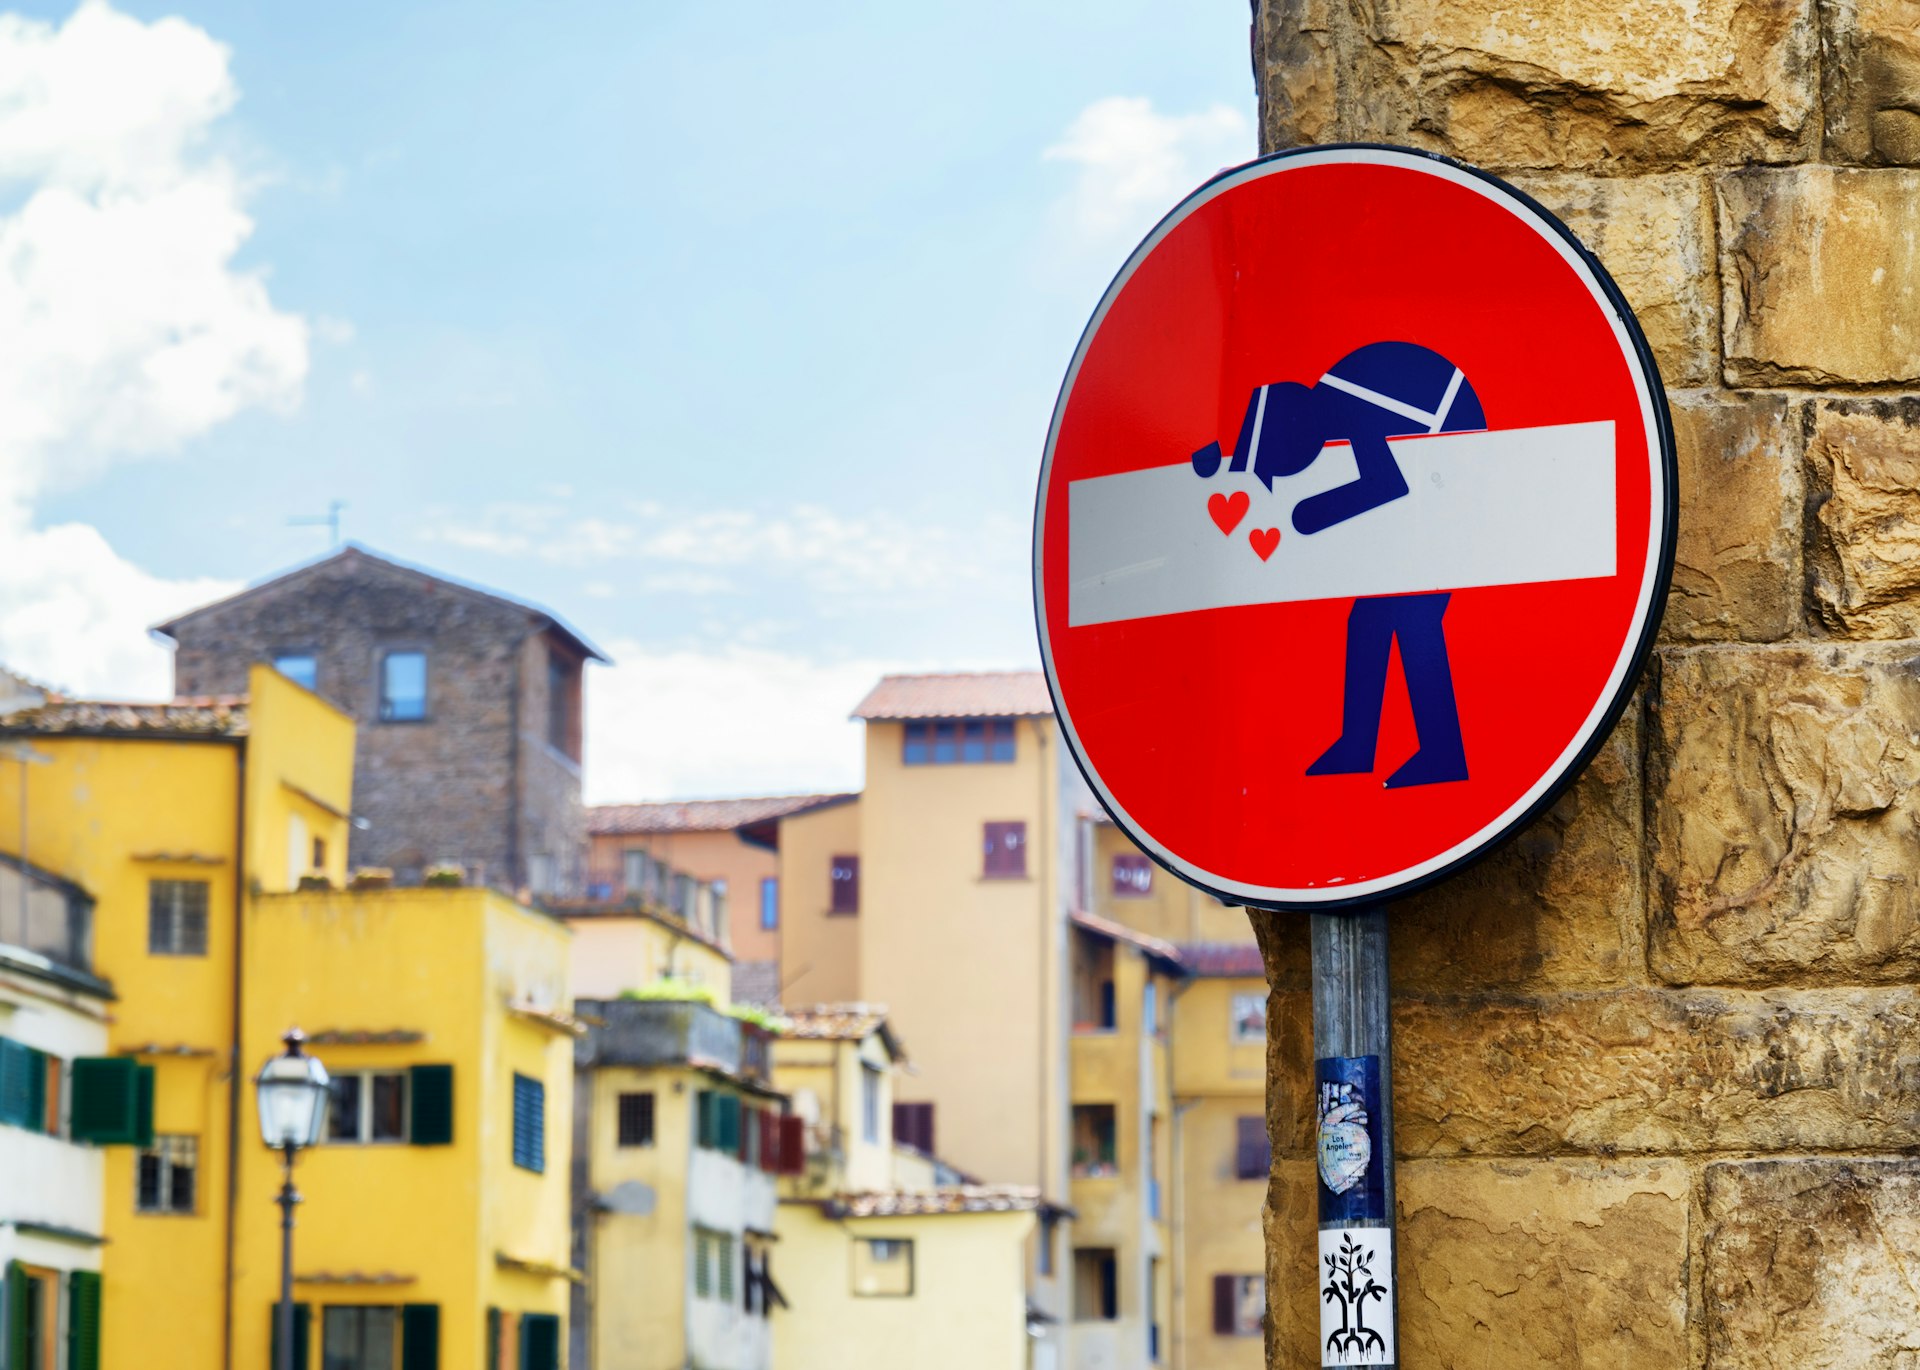 A circular no entry sign that has been altered by a street artist to include a cartoon of a police officer.